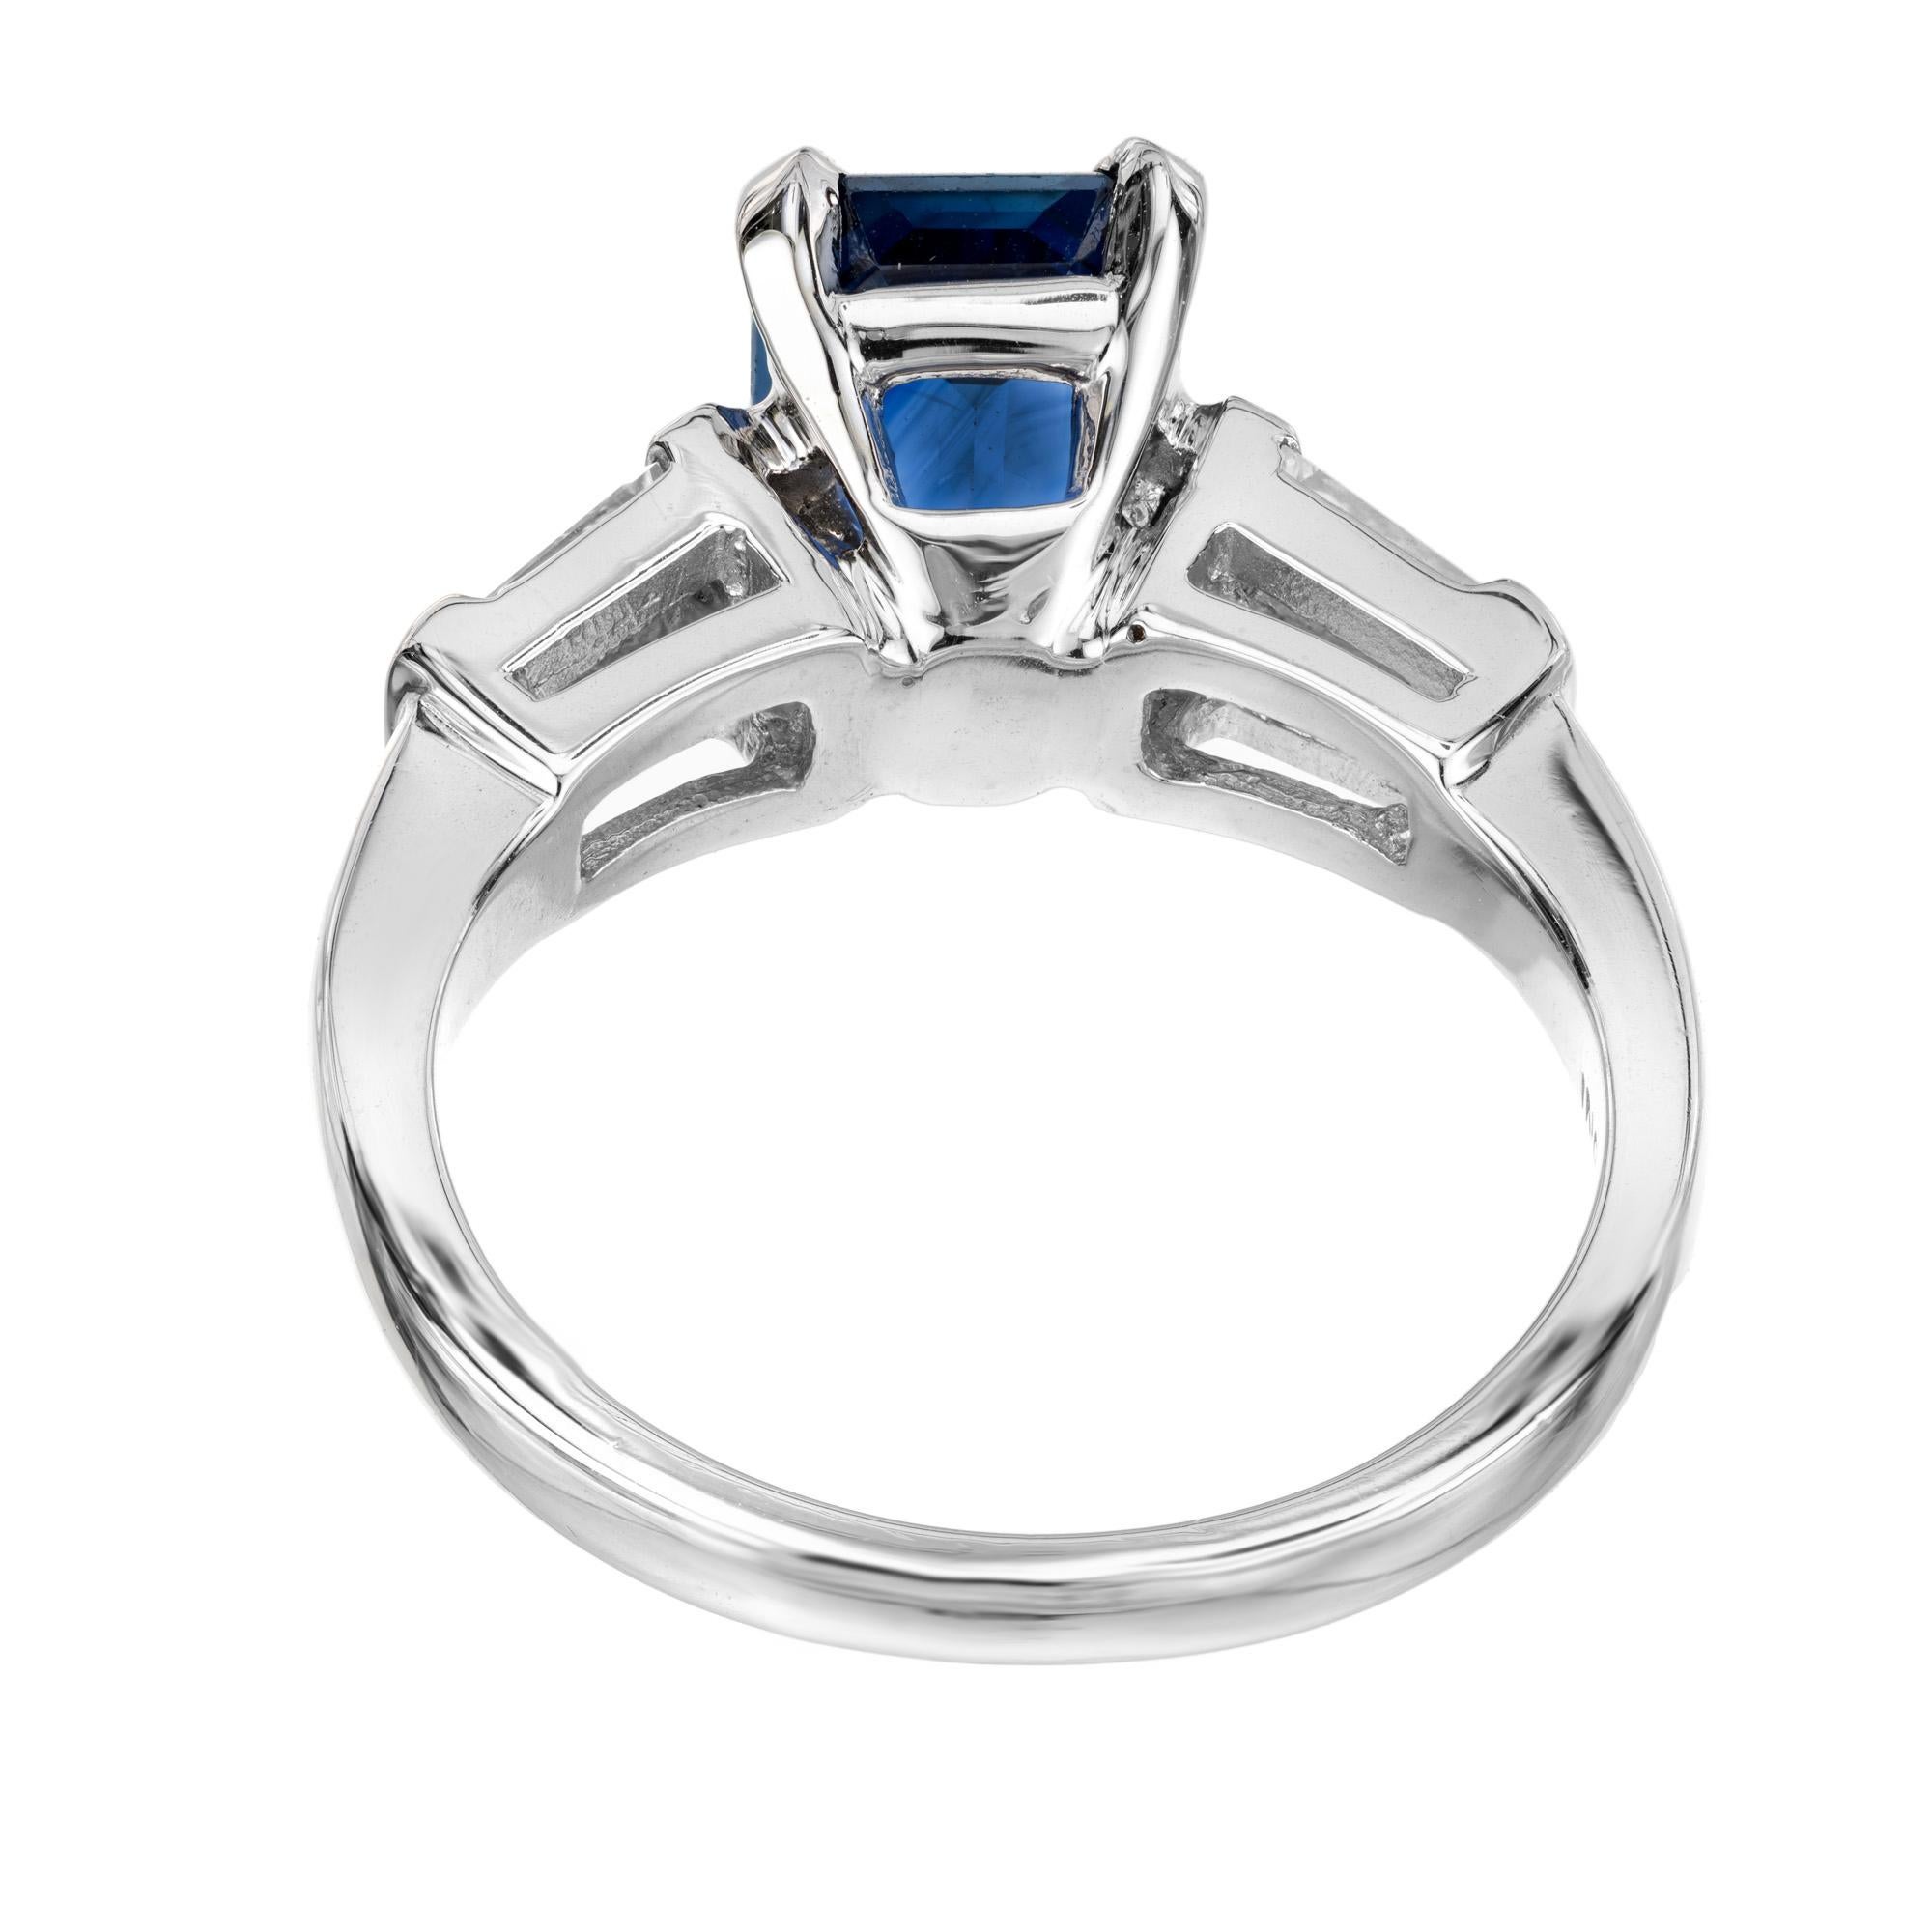 Peter Suchy GIA Certified 2.09 Carat Sapphire Diamond Platinum Engagement Ring For Sale 1